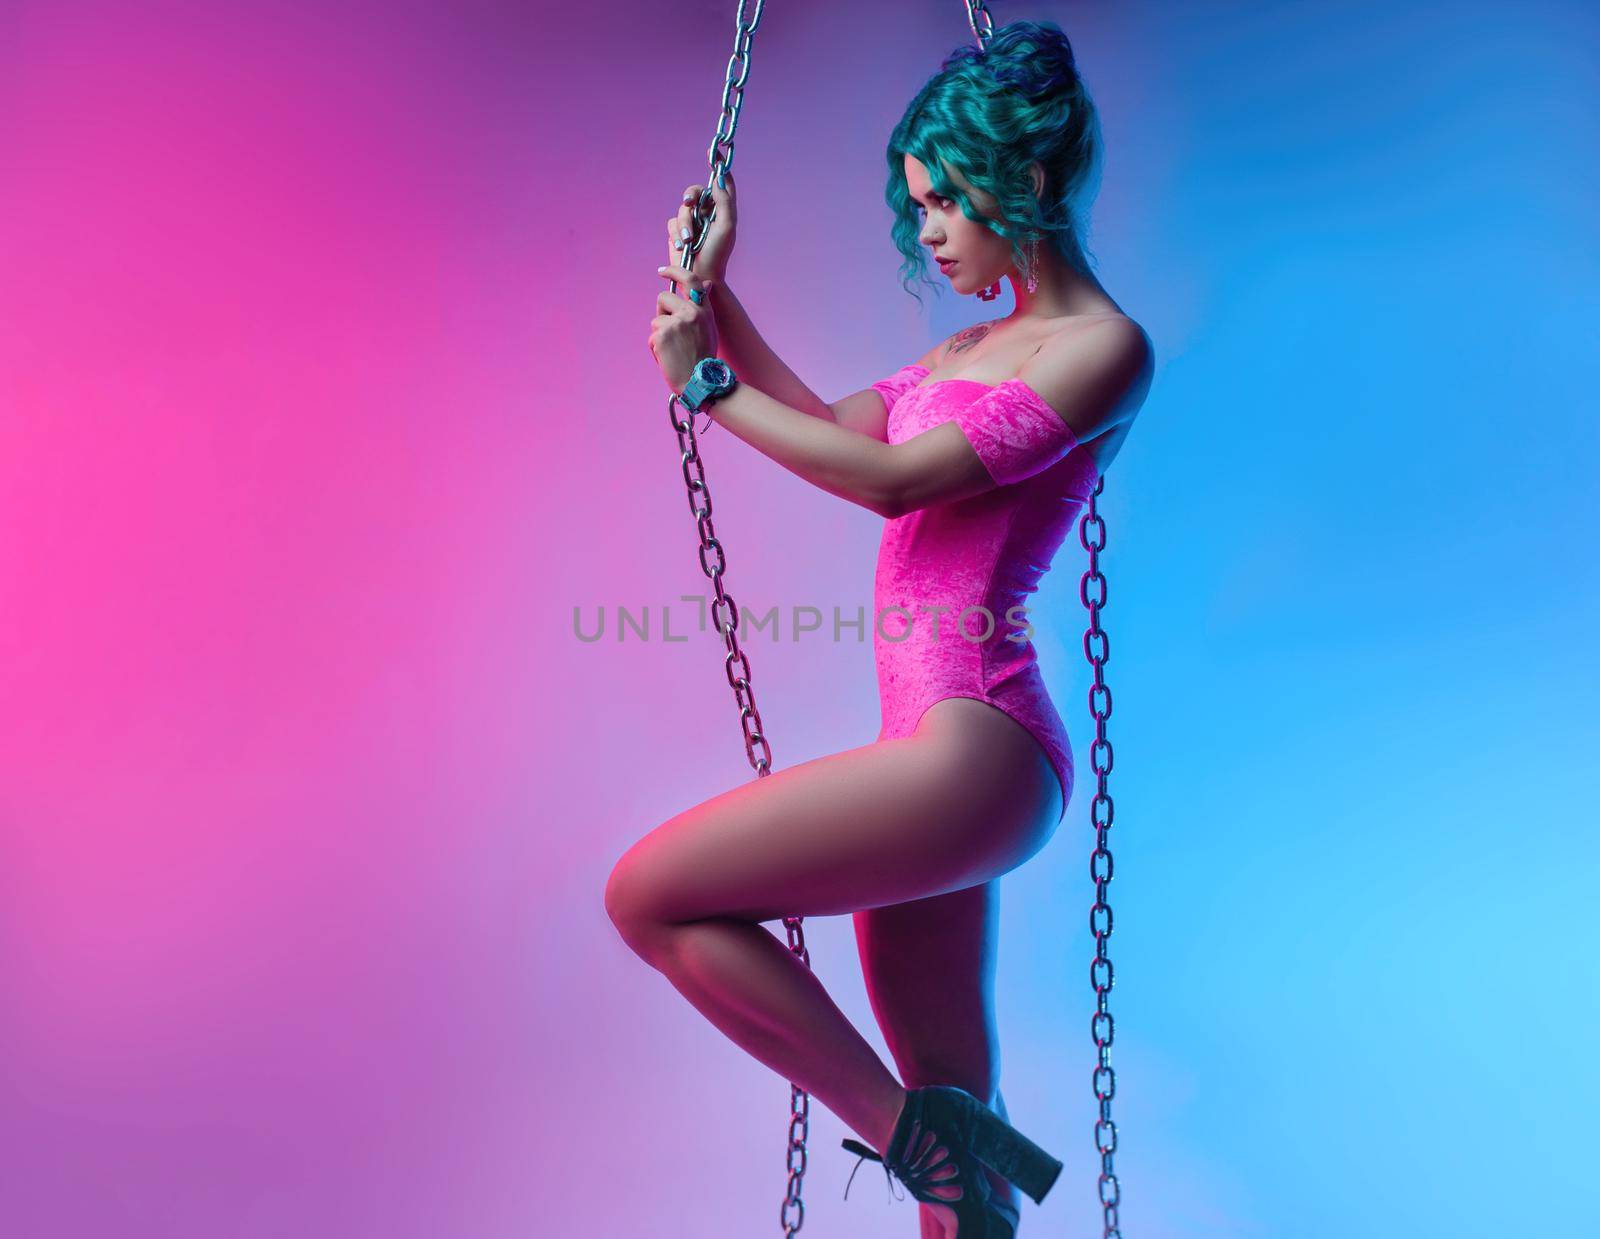 the sexy girl with colored hair in a bright pink bodysuit with a metal chain on a neon background